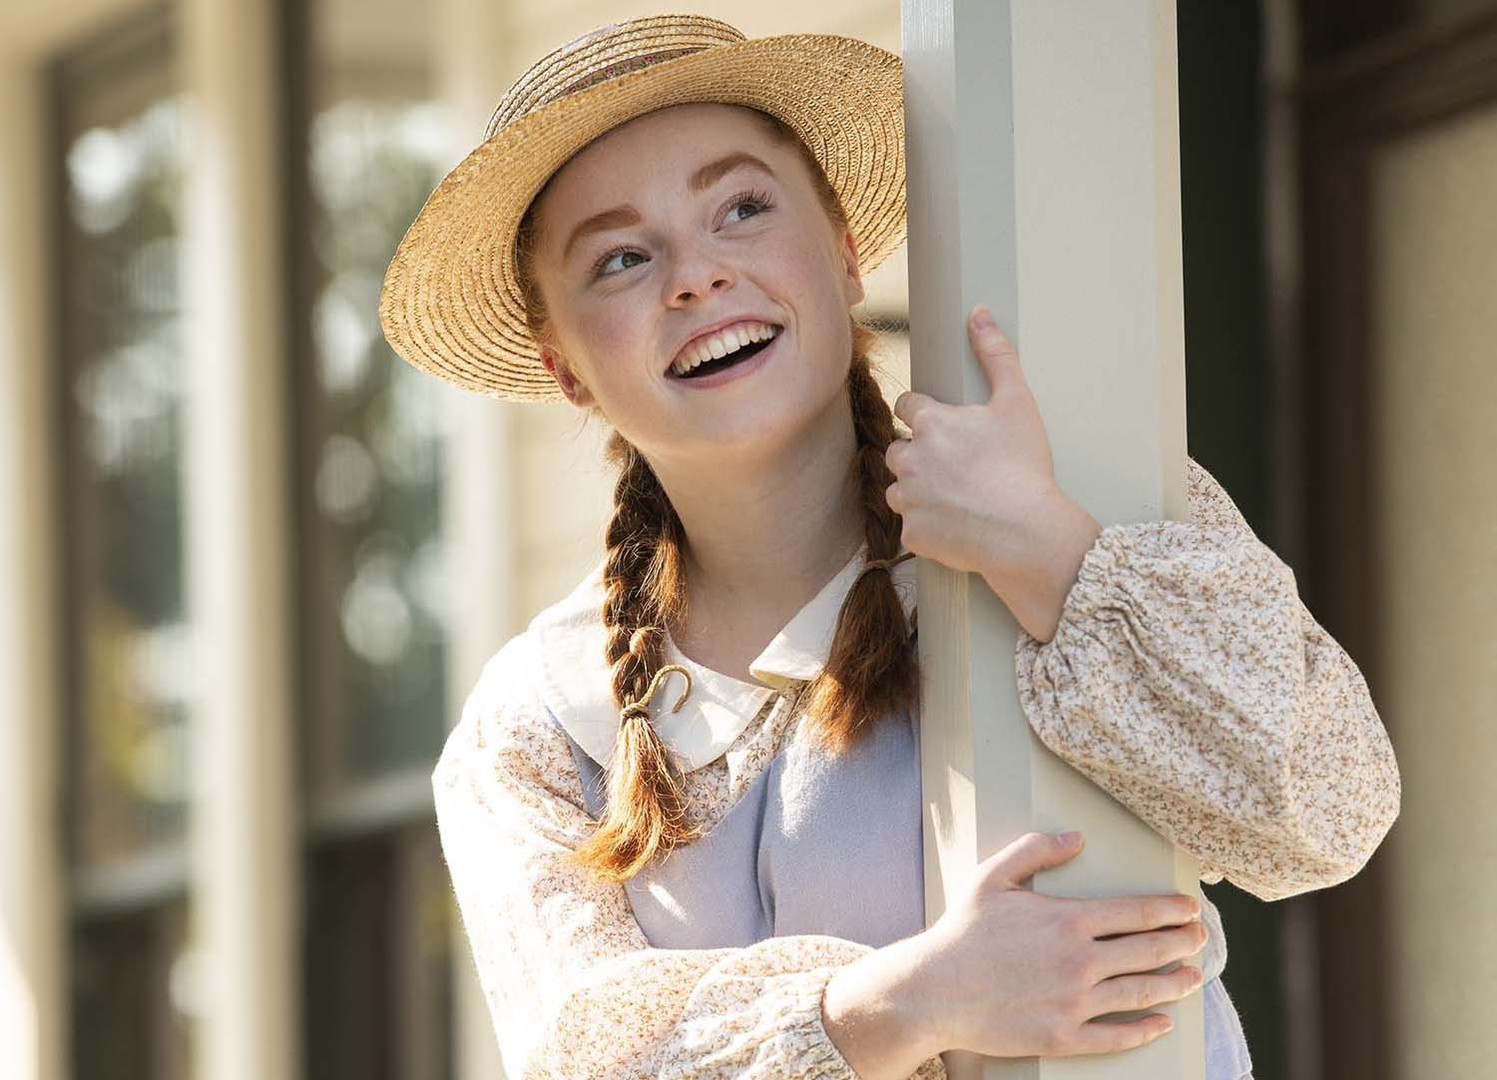 Anne of Green Gables - The Musical™ is on Gateway's MainStage this December, Richmond, British Columbia, Canada